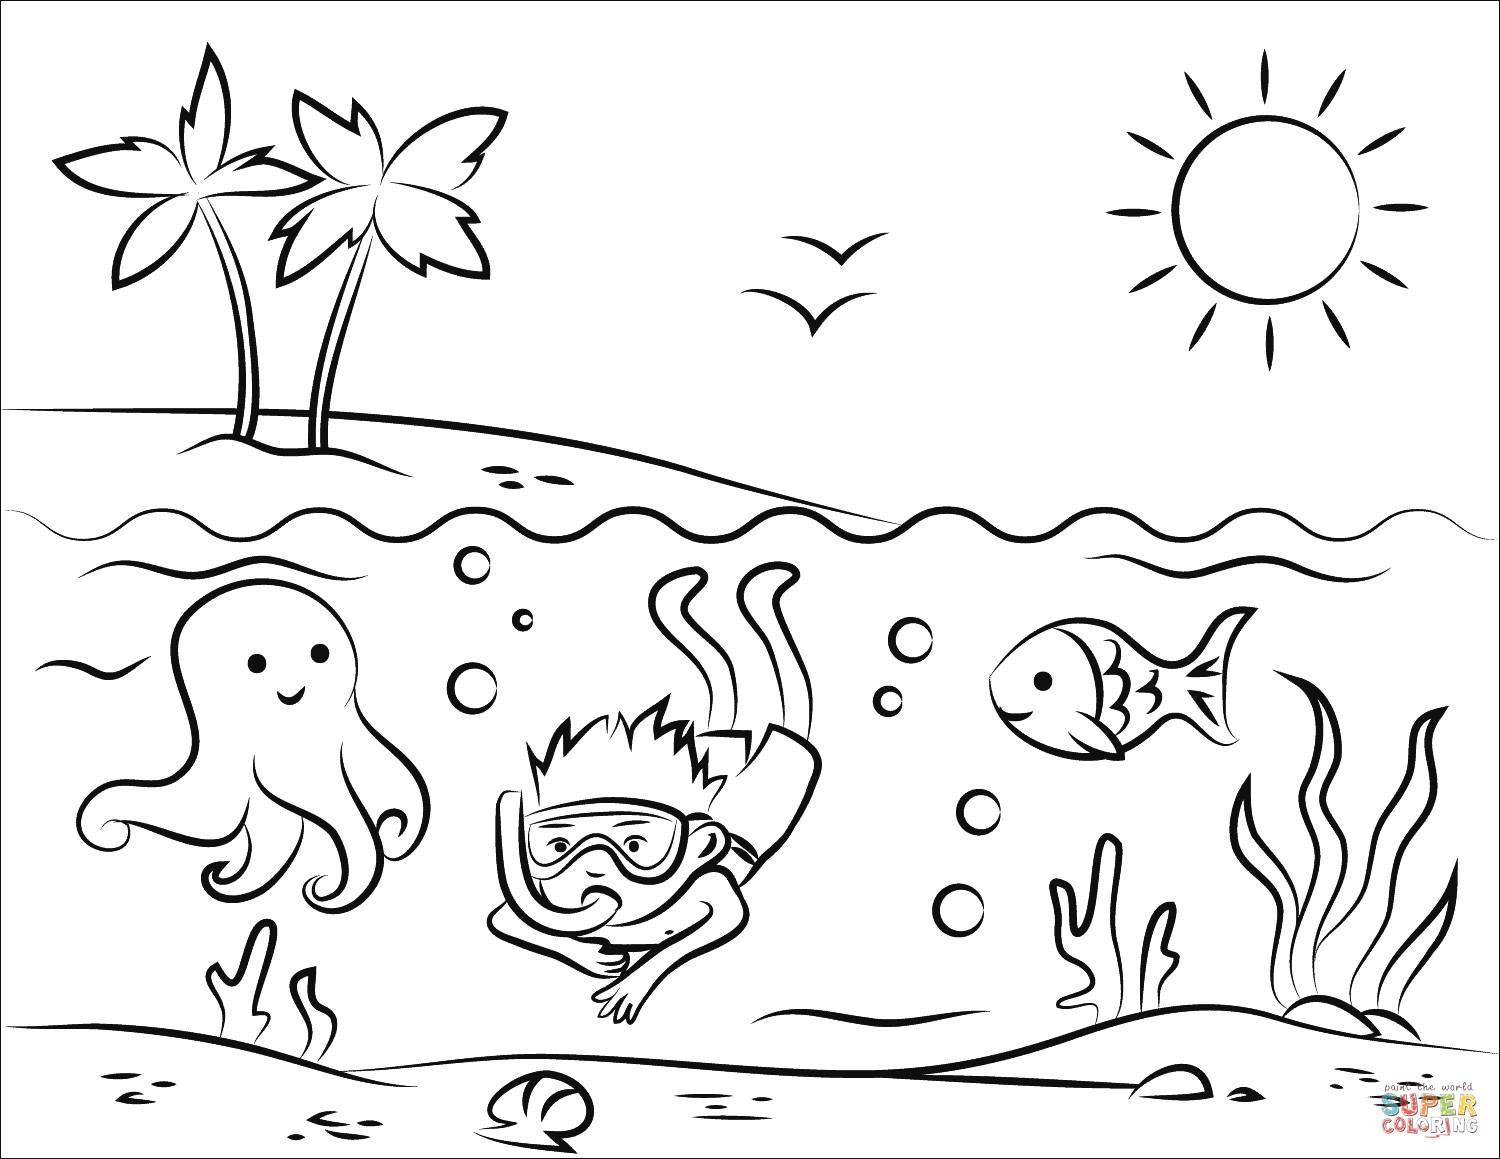 Beach Printable Coloring Pages
 Tropical Beach coloring page